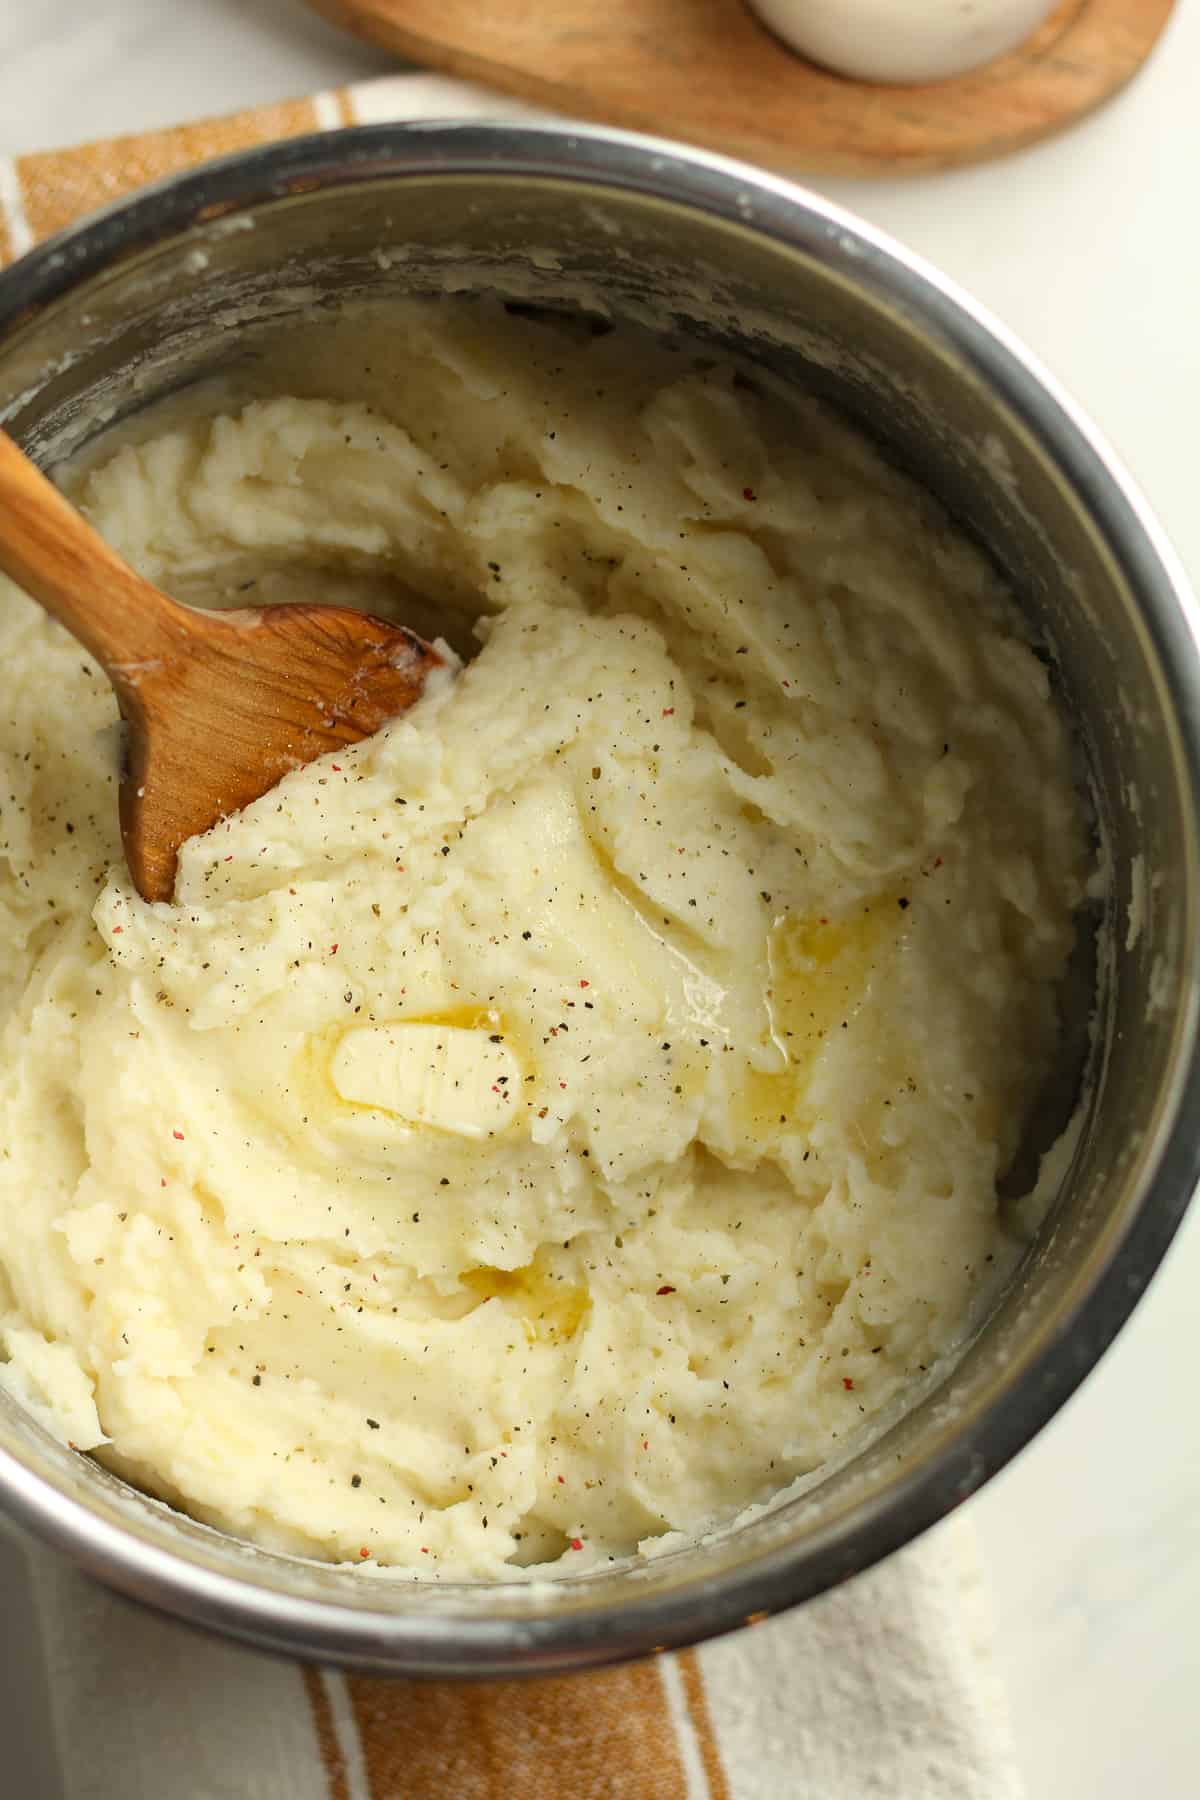 Overhead shot of an Instant Pot full of garlic mashed potatoes.